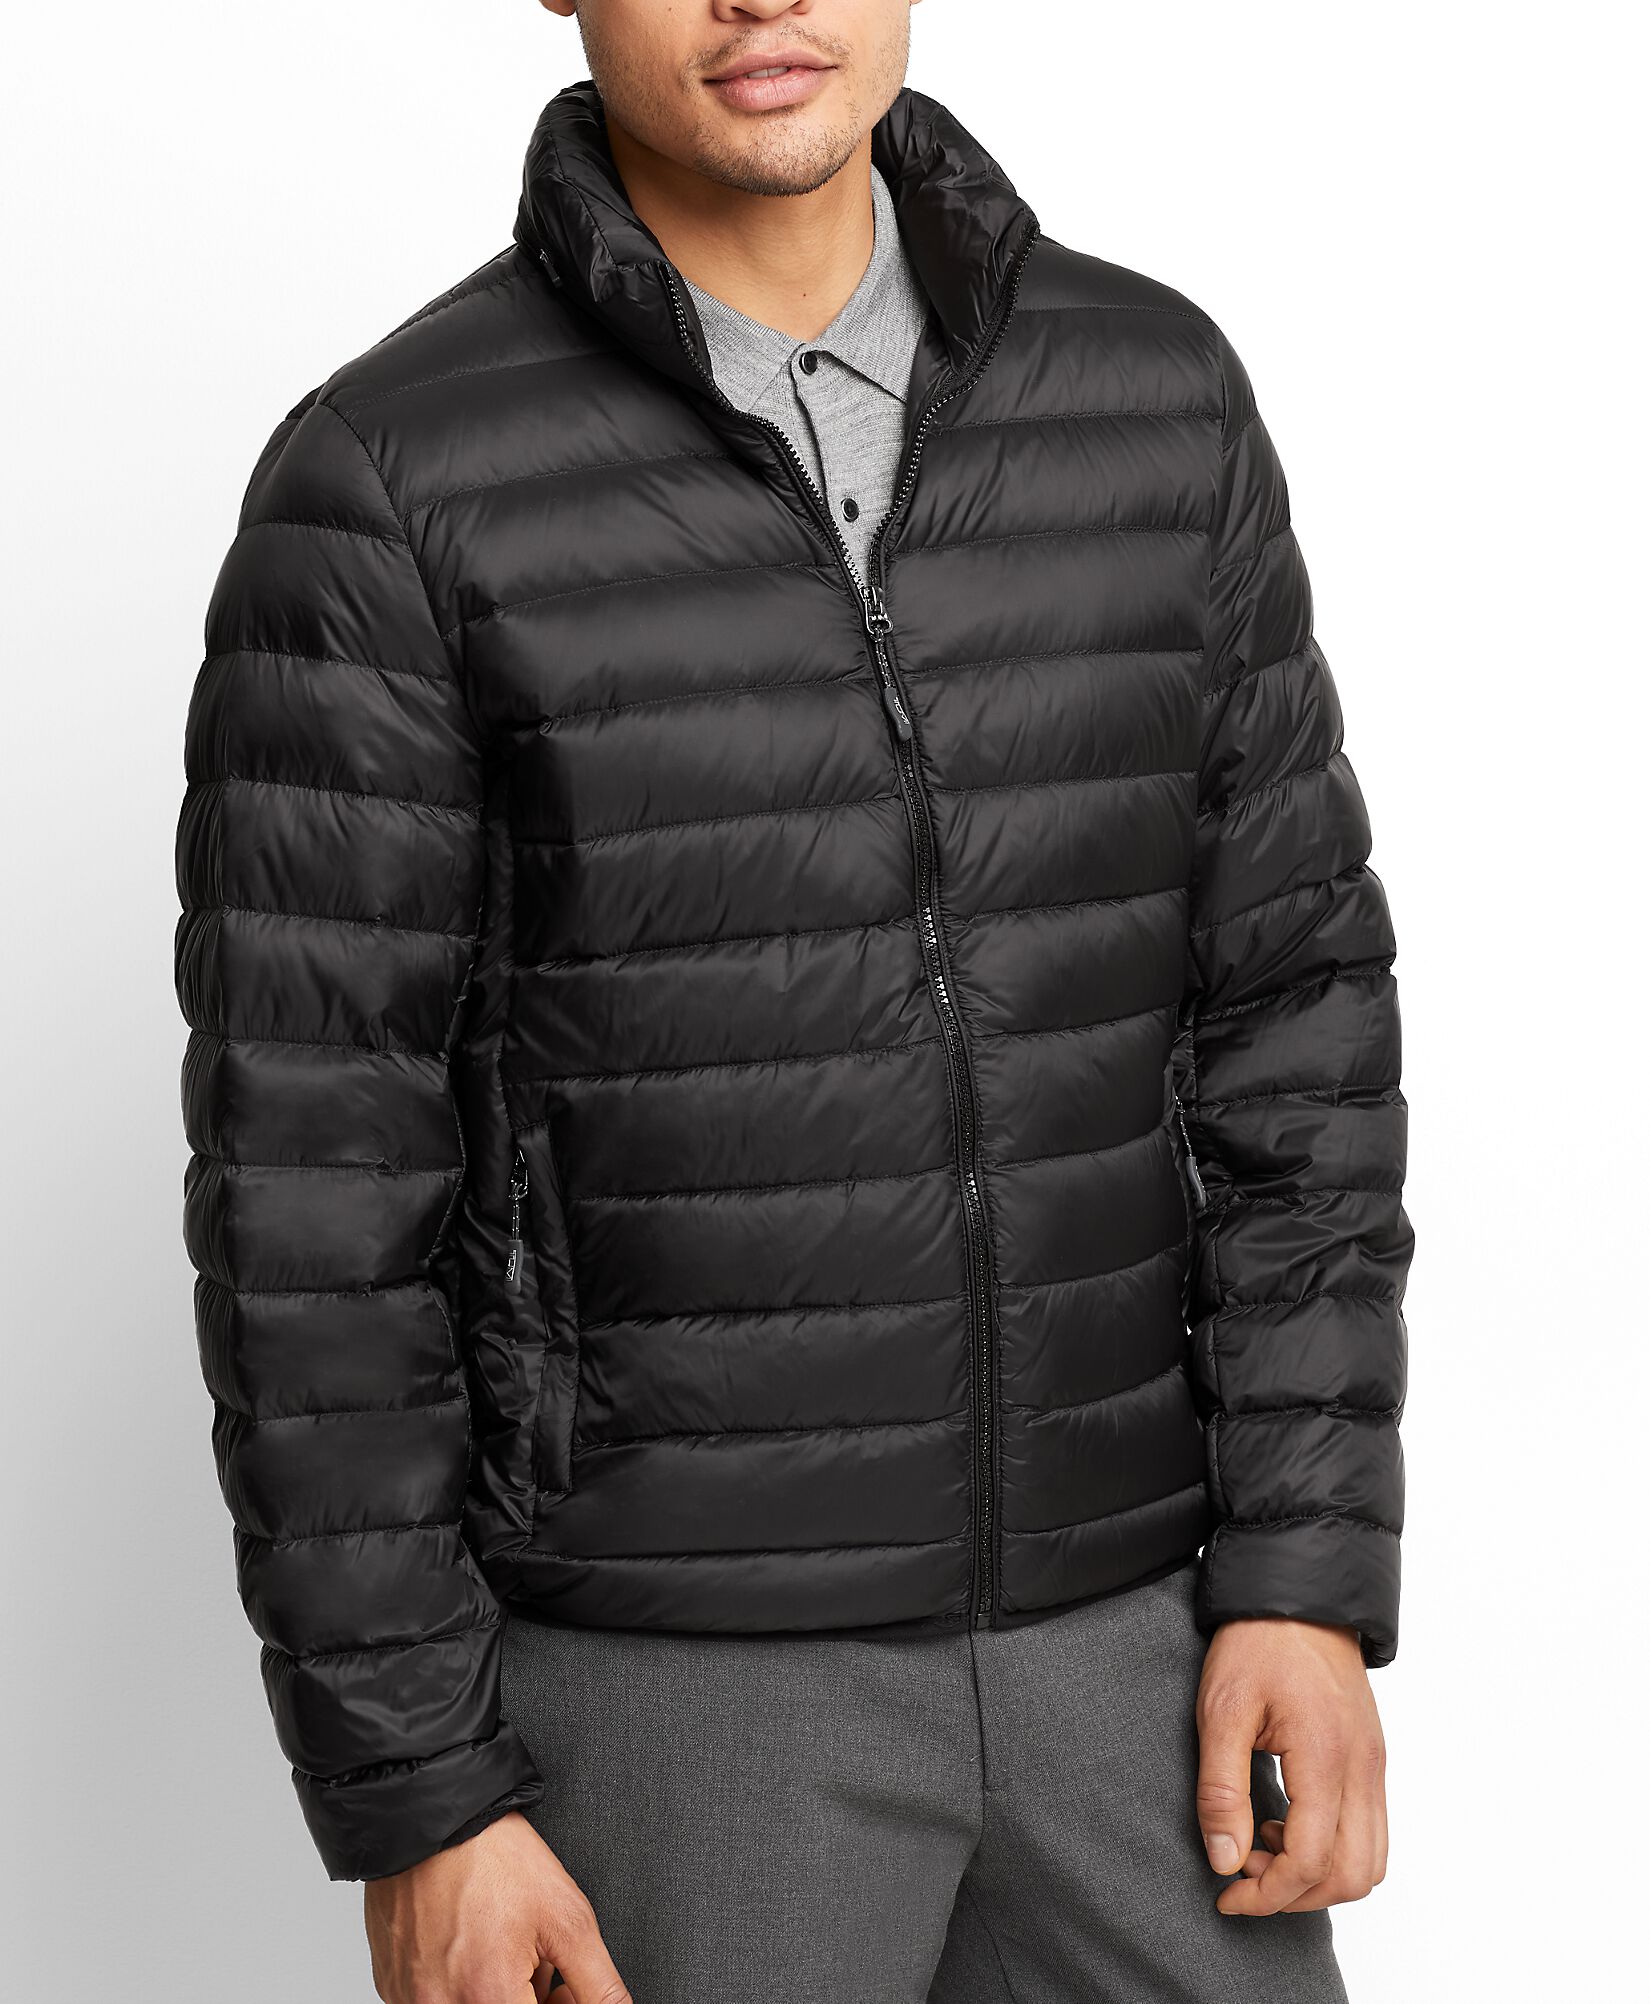 tumi packable jacket with hood